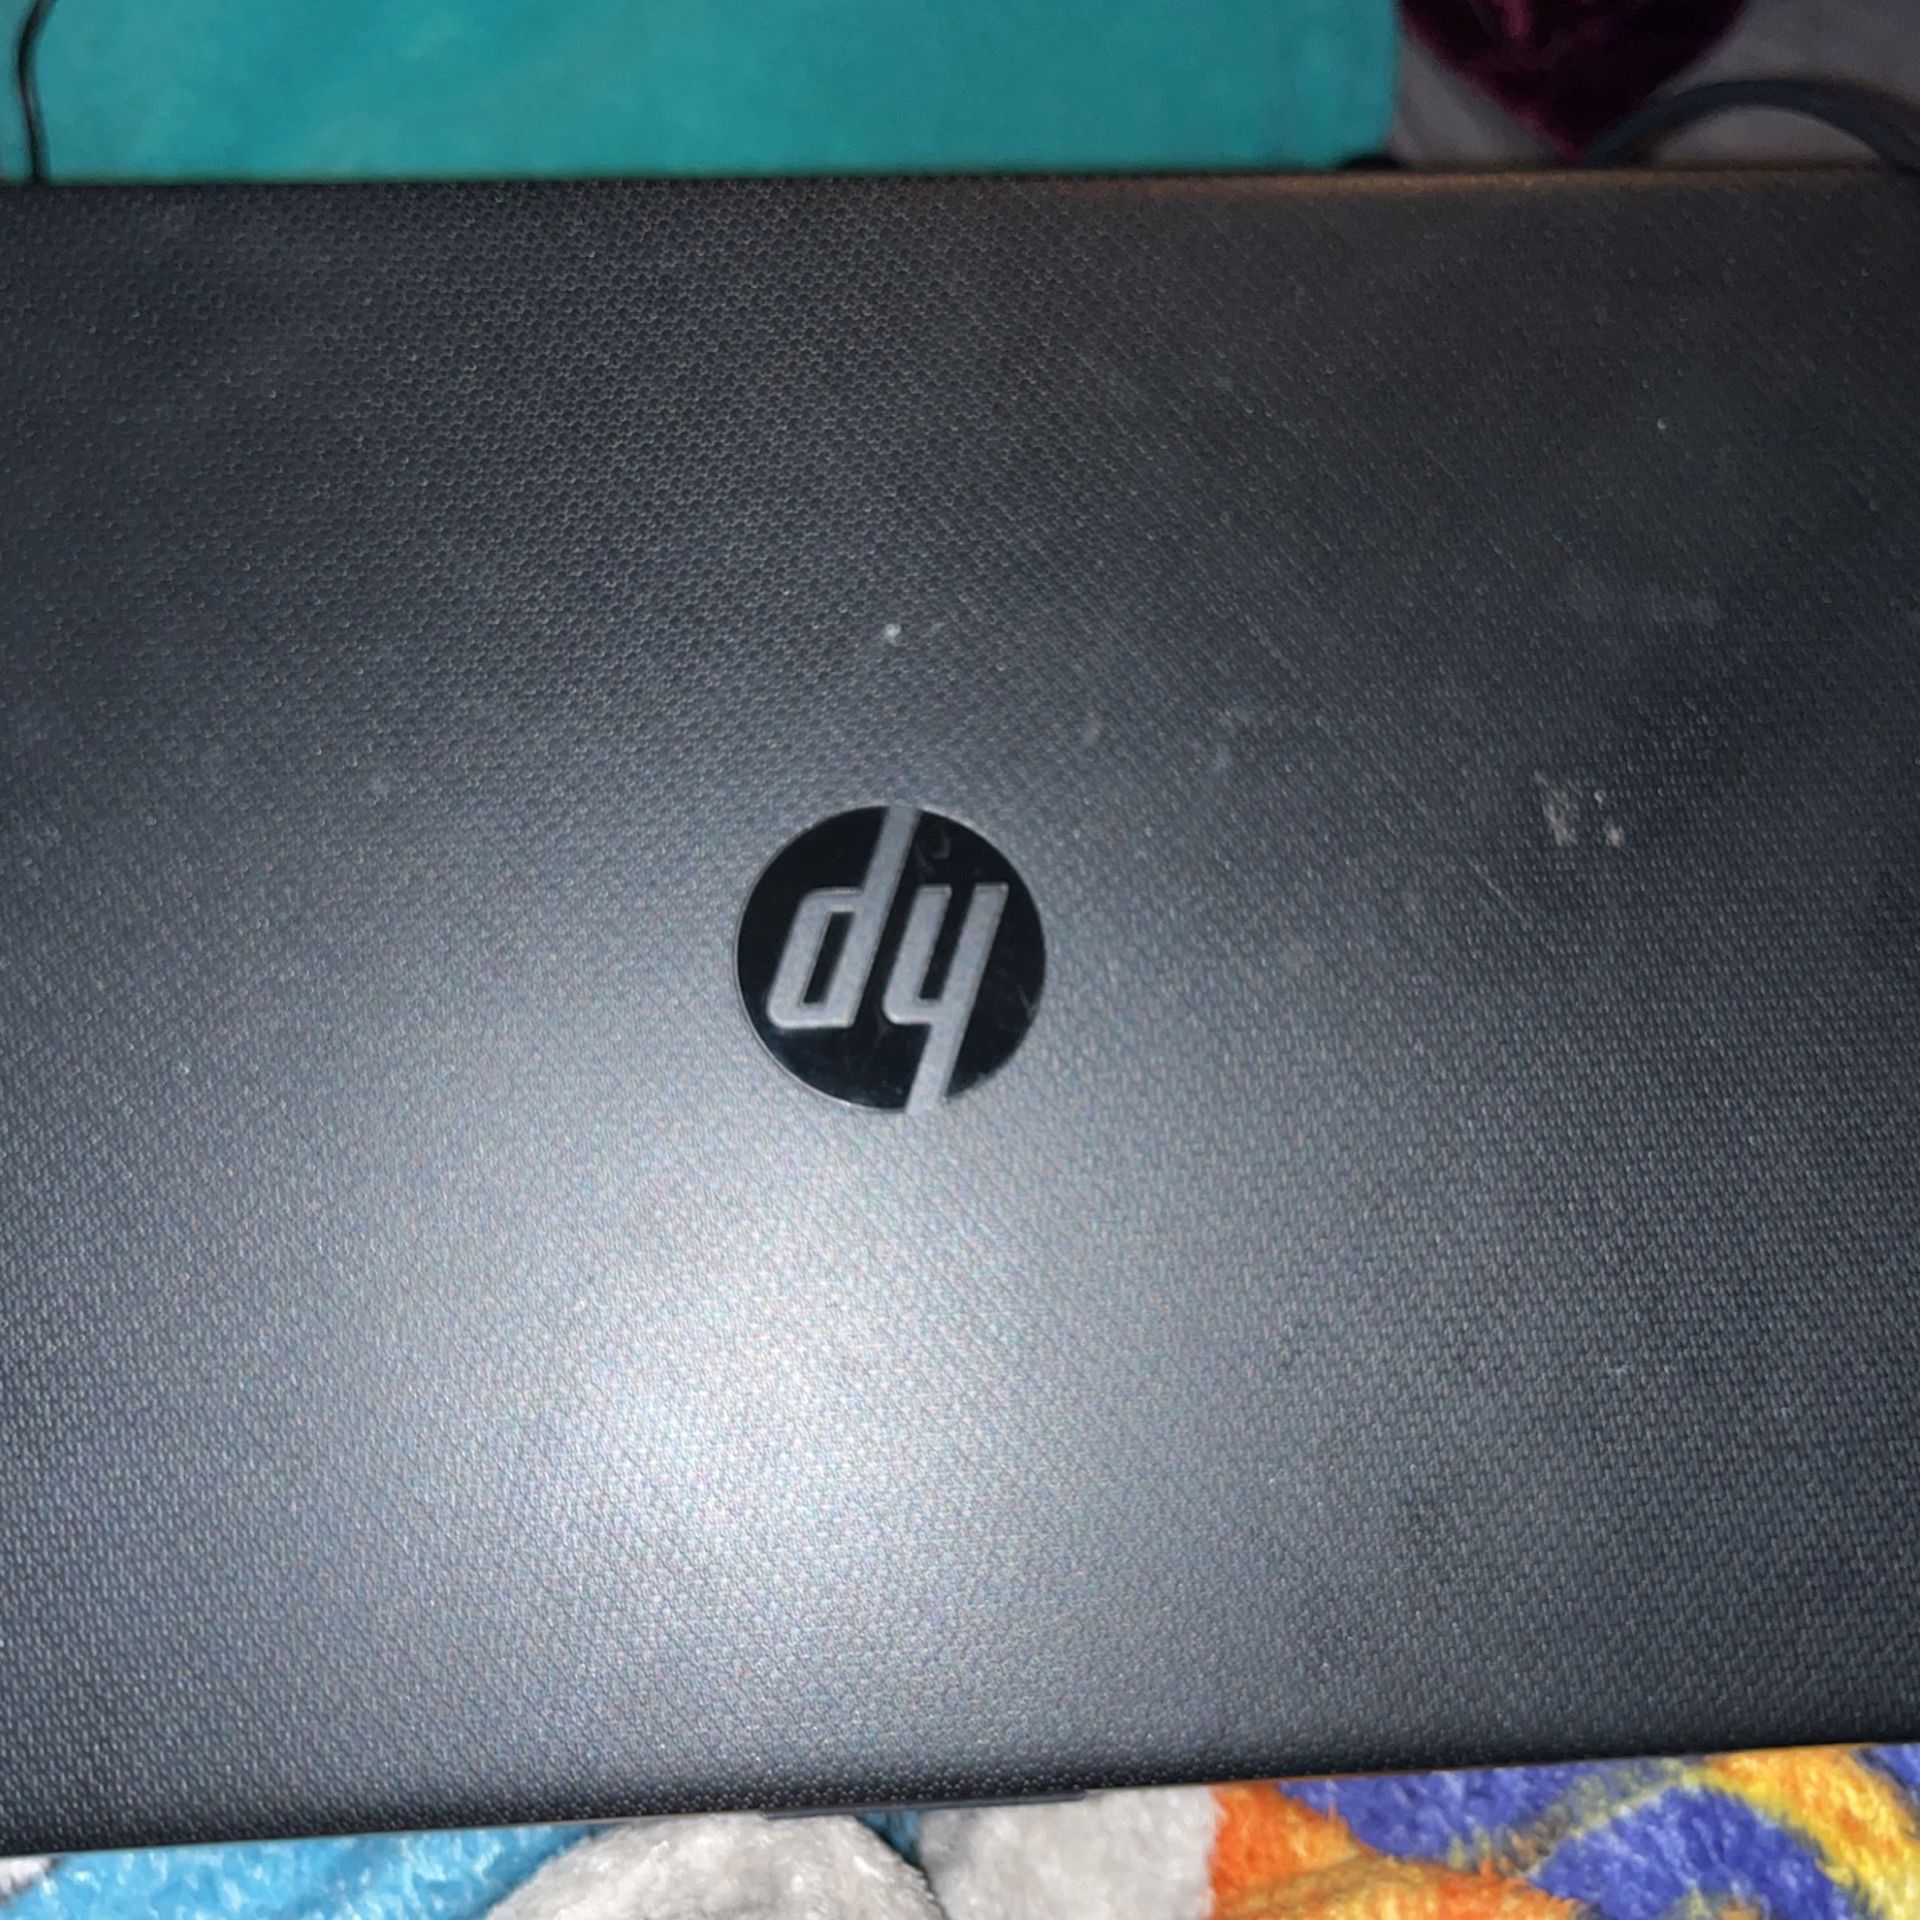 HP 14" Laptop with Windows Home